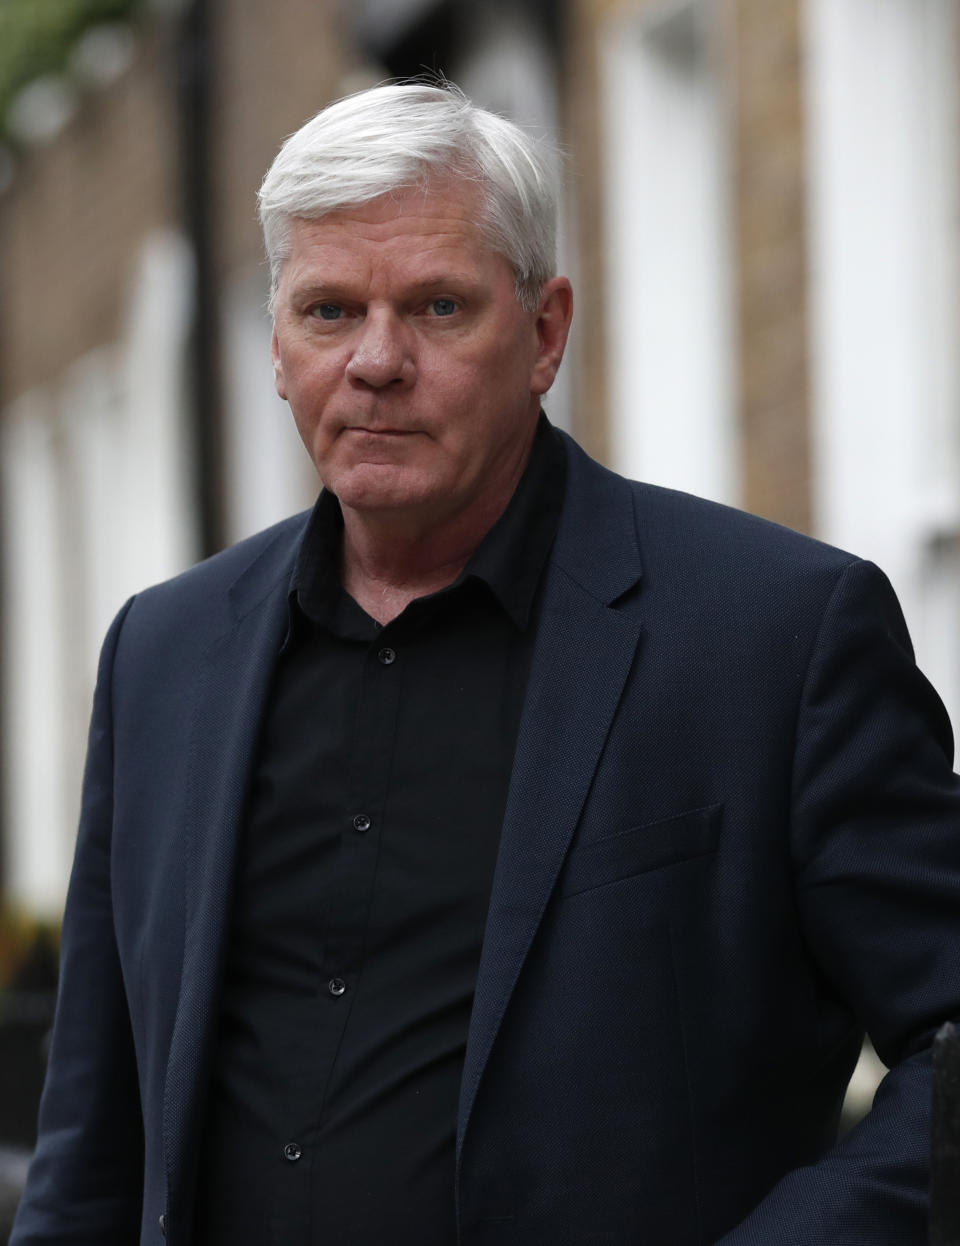 Kristinn Hrafnnson, Wikileaks editor in chief, poses for a portrait during a interview with the Associated Press in London, Friday, April 12, 2019. WikiLeaks founder Julian Assange has exchanged a small room at the Ecuadorian Embassy in central London for a cell at Belmarsh Prison, a grim institution in the southeast part of the city where he nevertheless has certain advantages he didn’t have when he was holed up, hiding from the law. Hrafnsson said Friday that the ailing Assange should finally be able to receive medical care and will be able to meet with his lawyers more easily than he could in the embassy, where a feud with Ecuadorian authorities had led to a ban on most guests. (AP Photo/Alastair Grant)